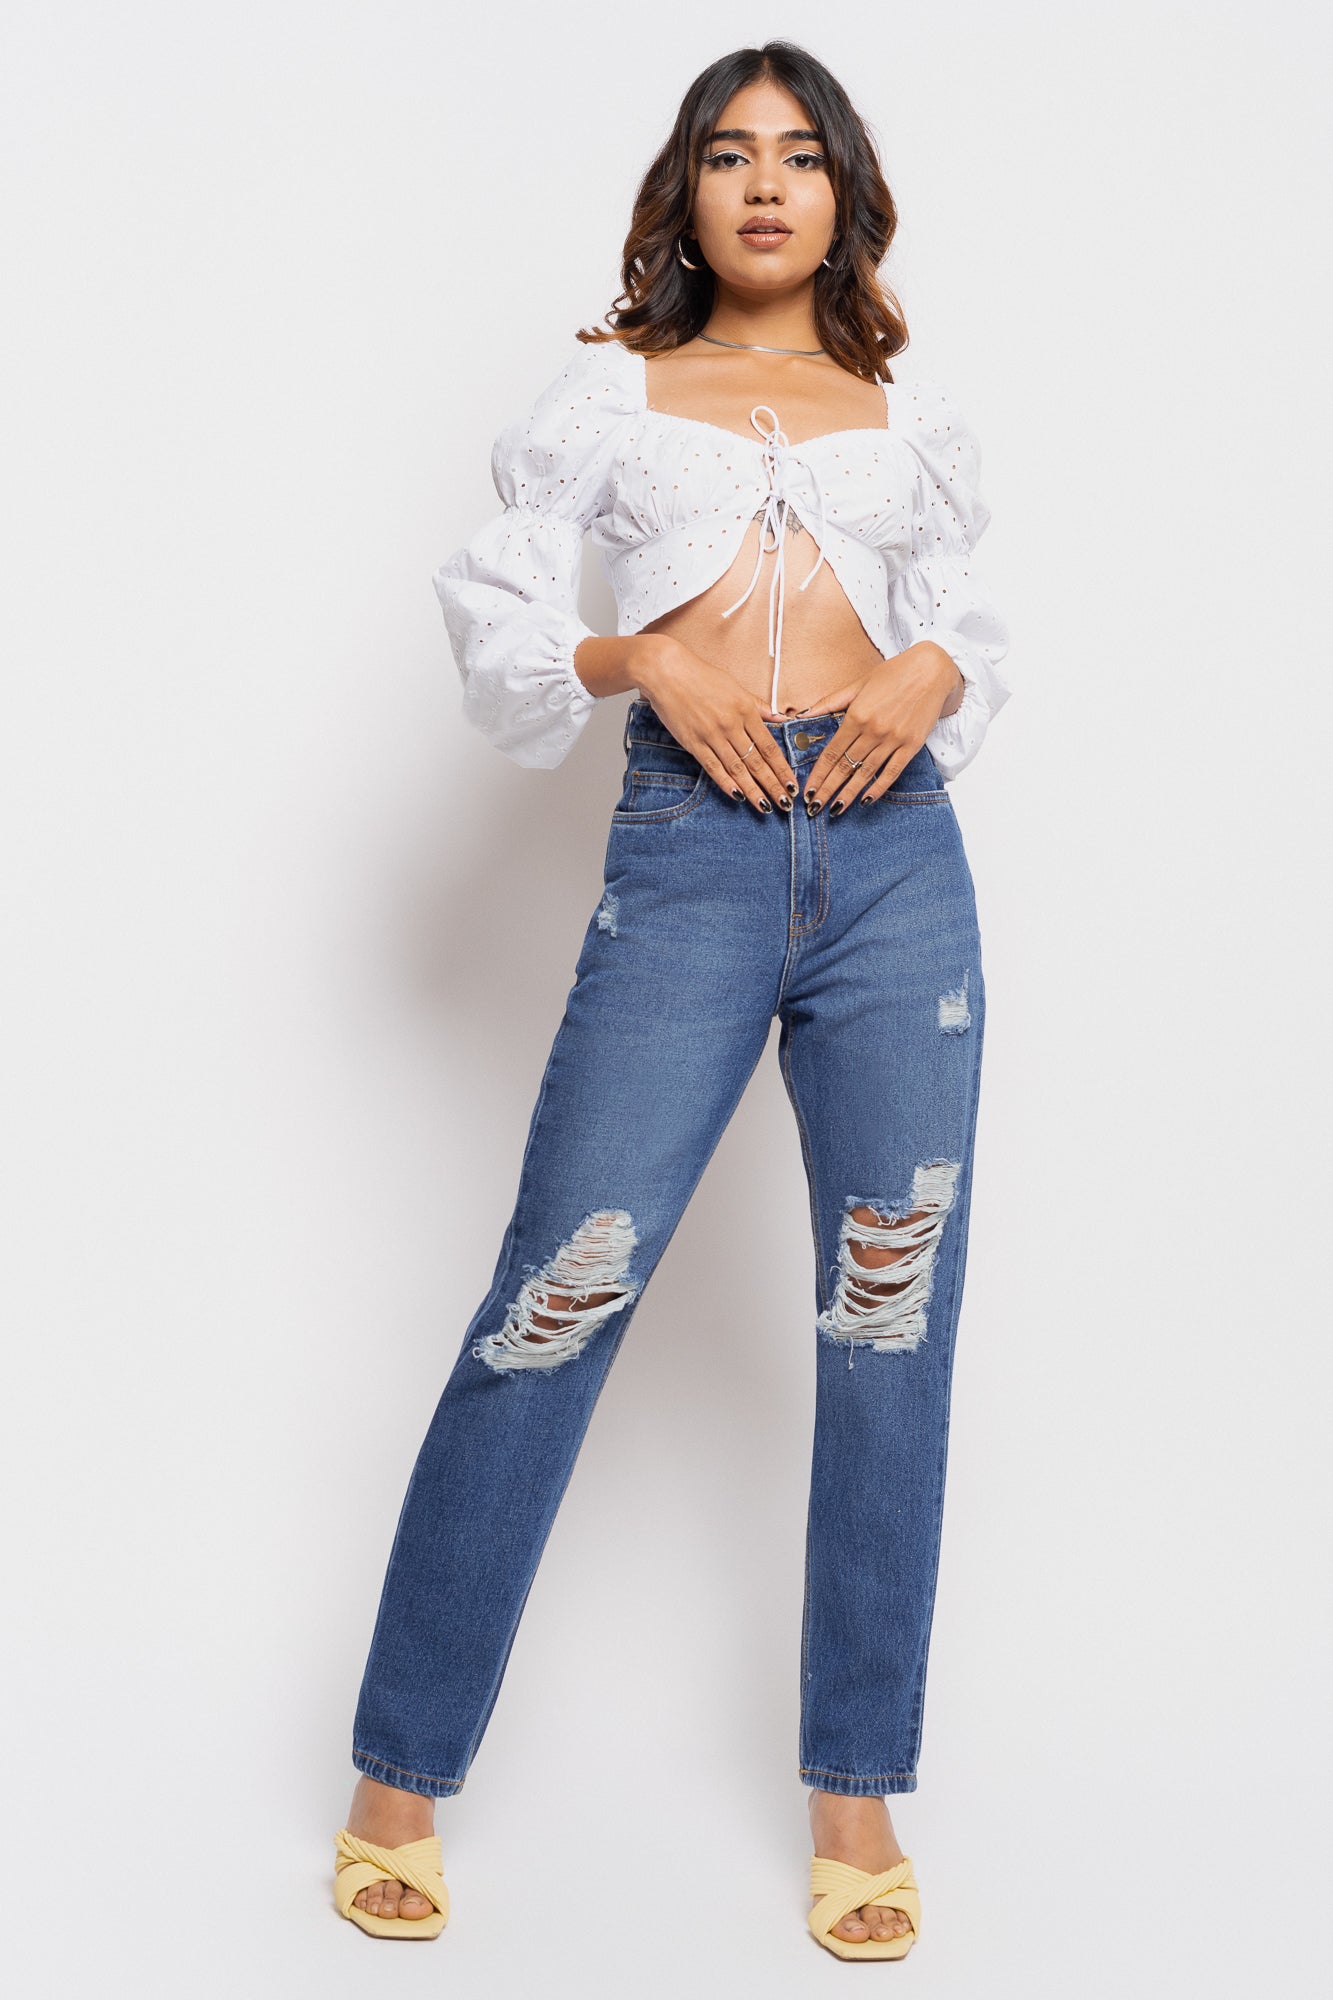 Pin by Nandini on Quick saves  Cut out jeans, Denim branding, Cut out